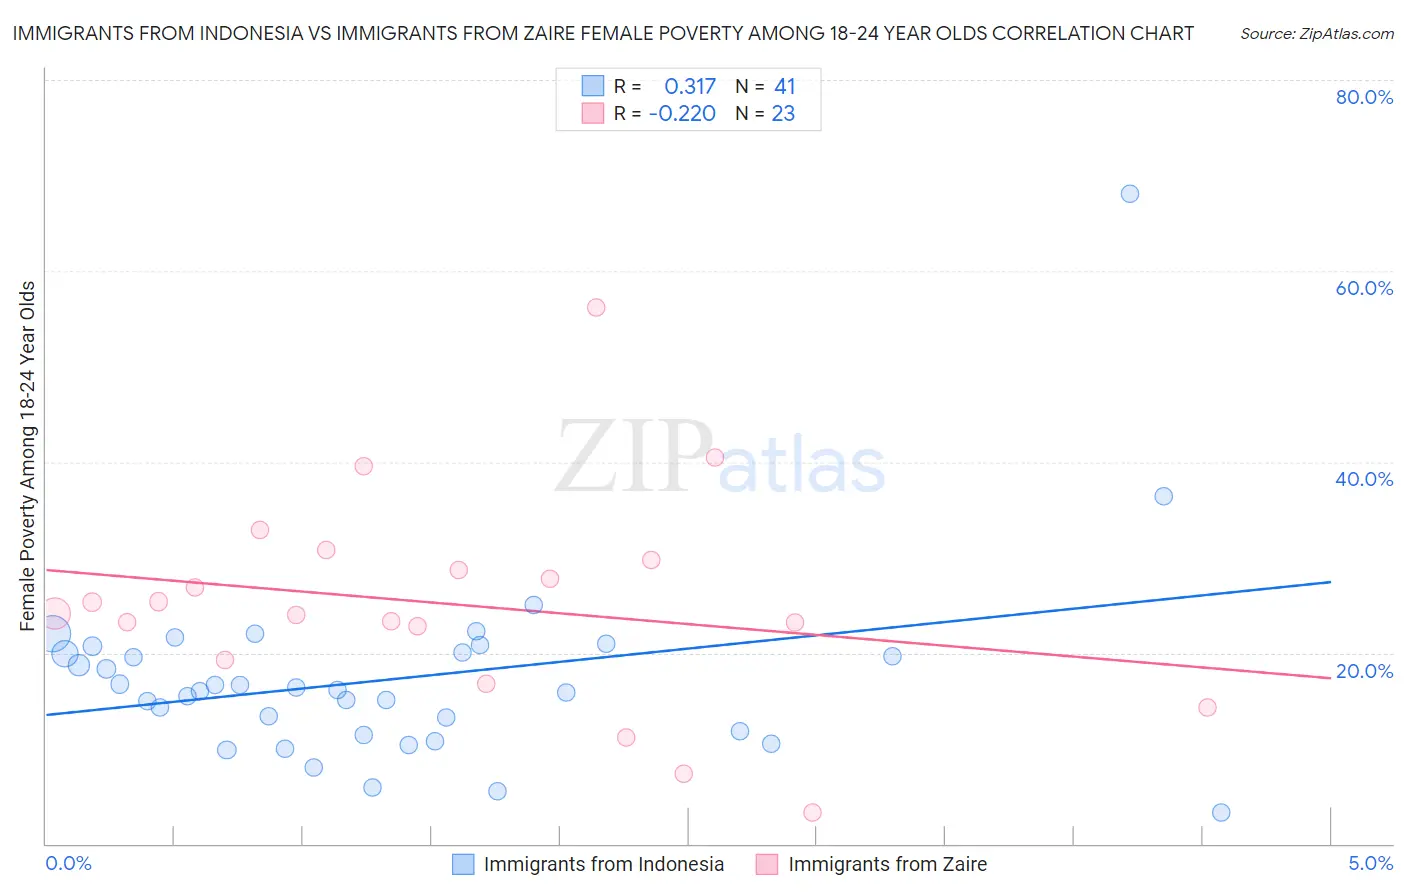 Immigrants from Indonesia vs Immigrants from Zaire Female Poverty Among 18-24 Year Olds